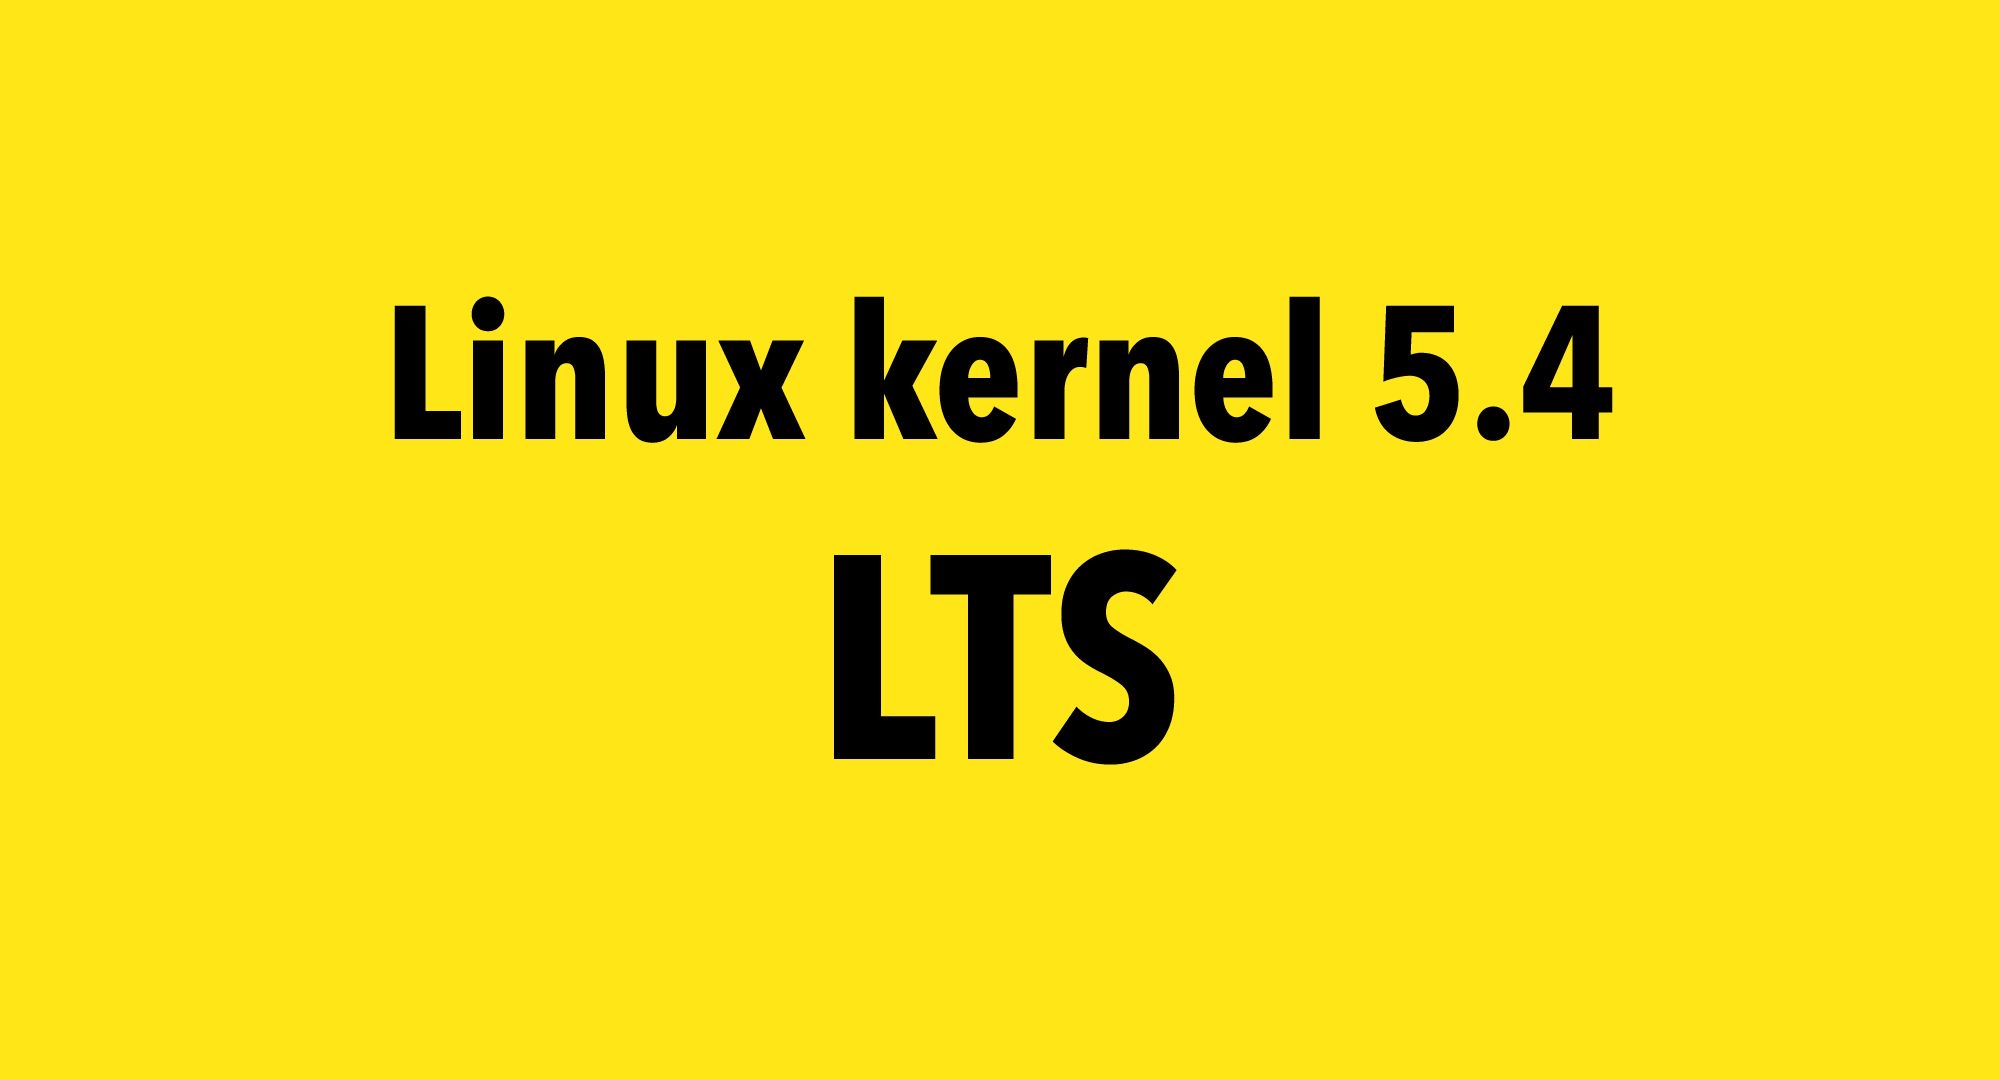 Linux Kernel 5.4 Is Now an Official LTS Release, Supported Until 2025